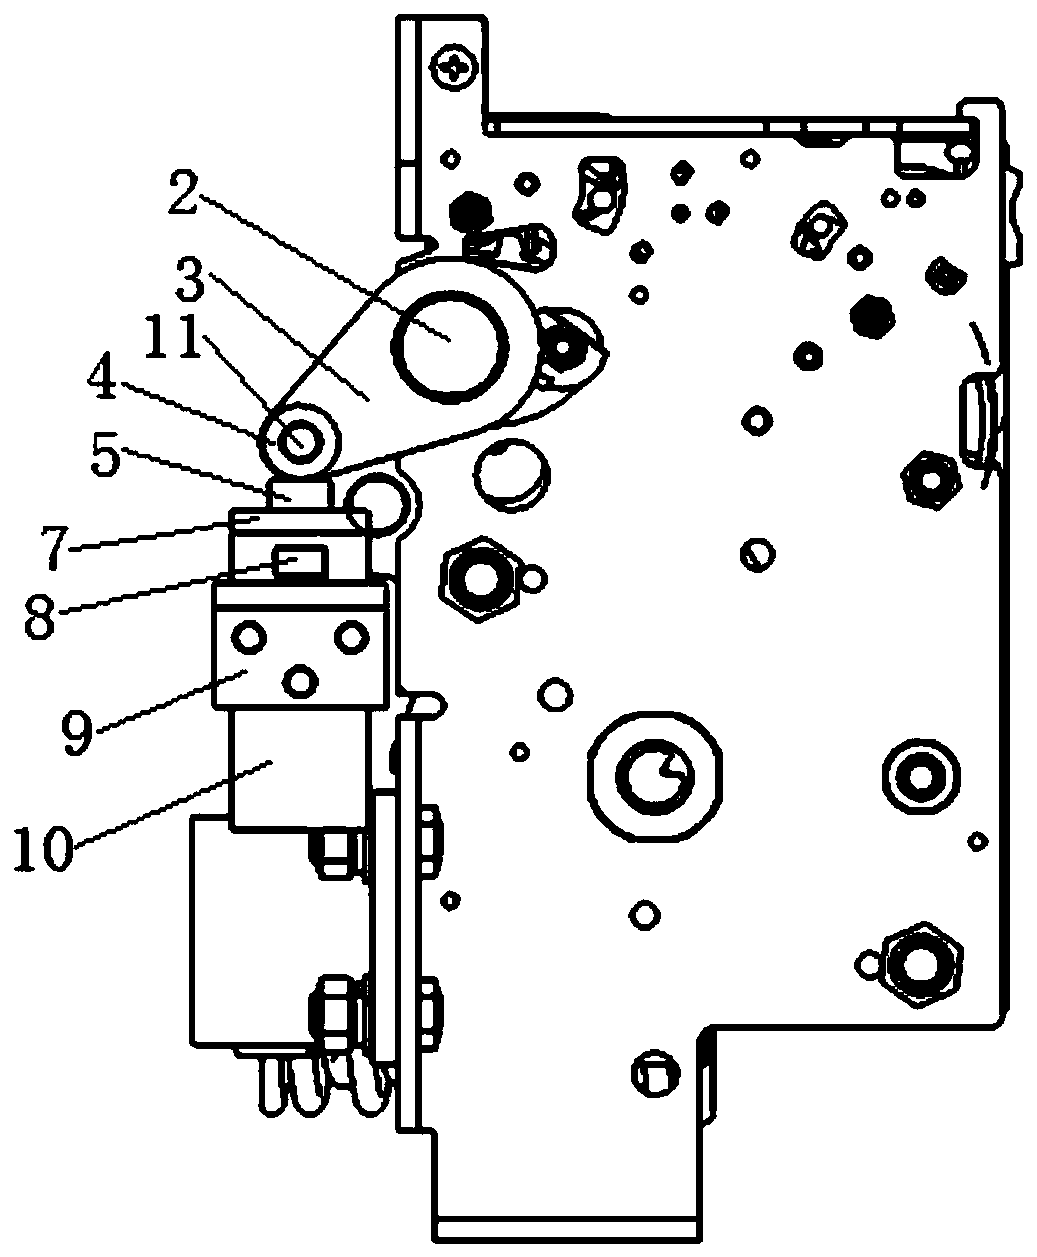 A mechanism with a flexible opening buffer anti-rebound device on a low-voltage circuit breaker